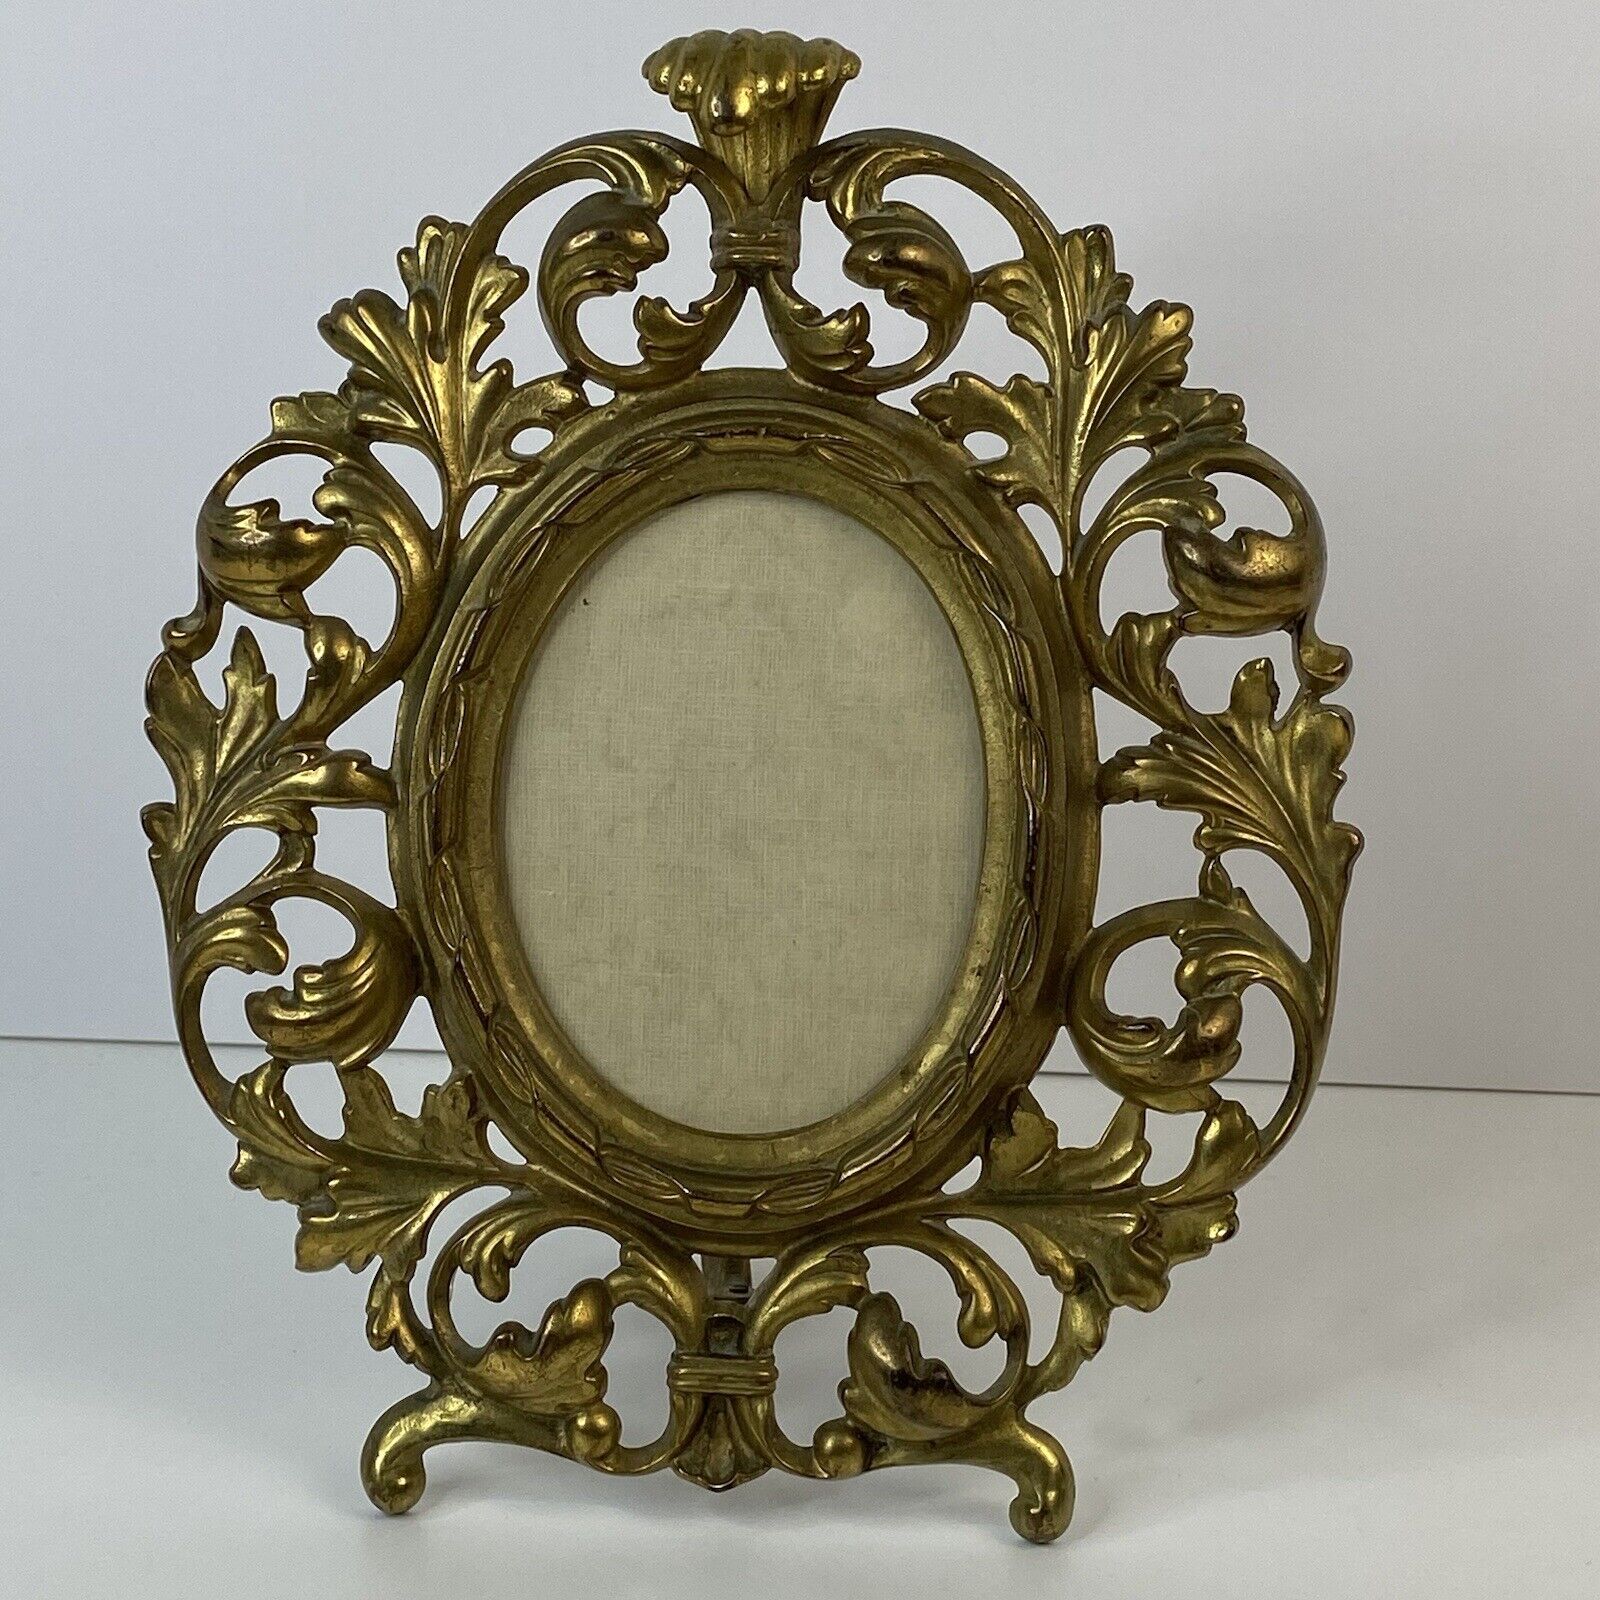 Vintage Rococo Cast Metal Picture Frame Brass Gold Tone with Easel Stand 8.5x11”